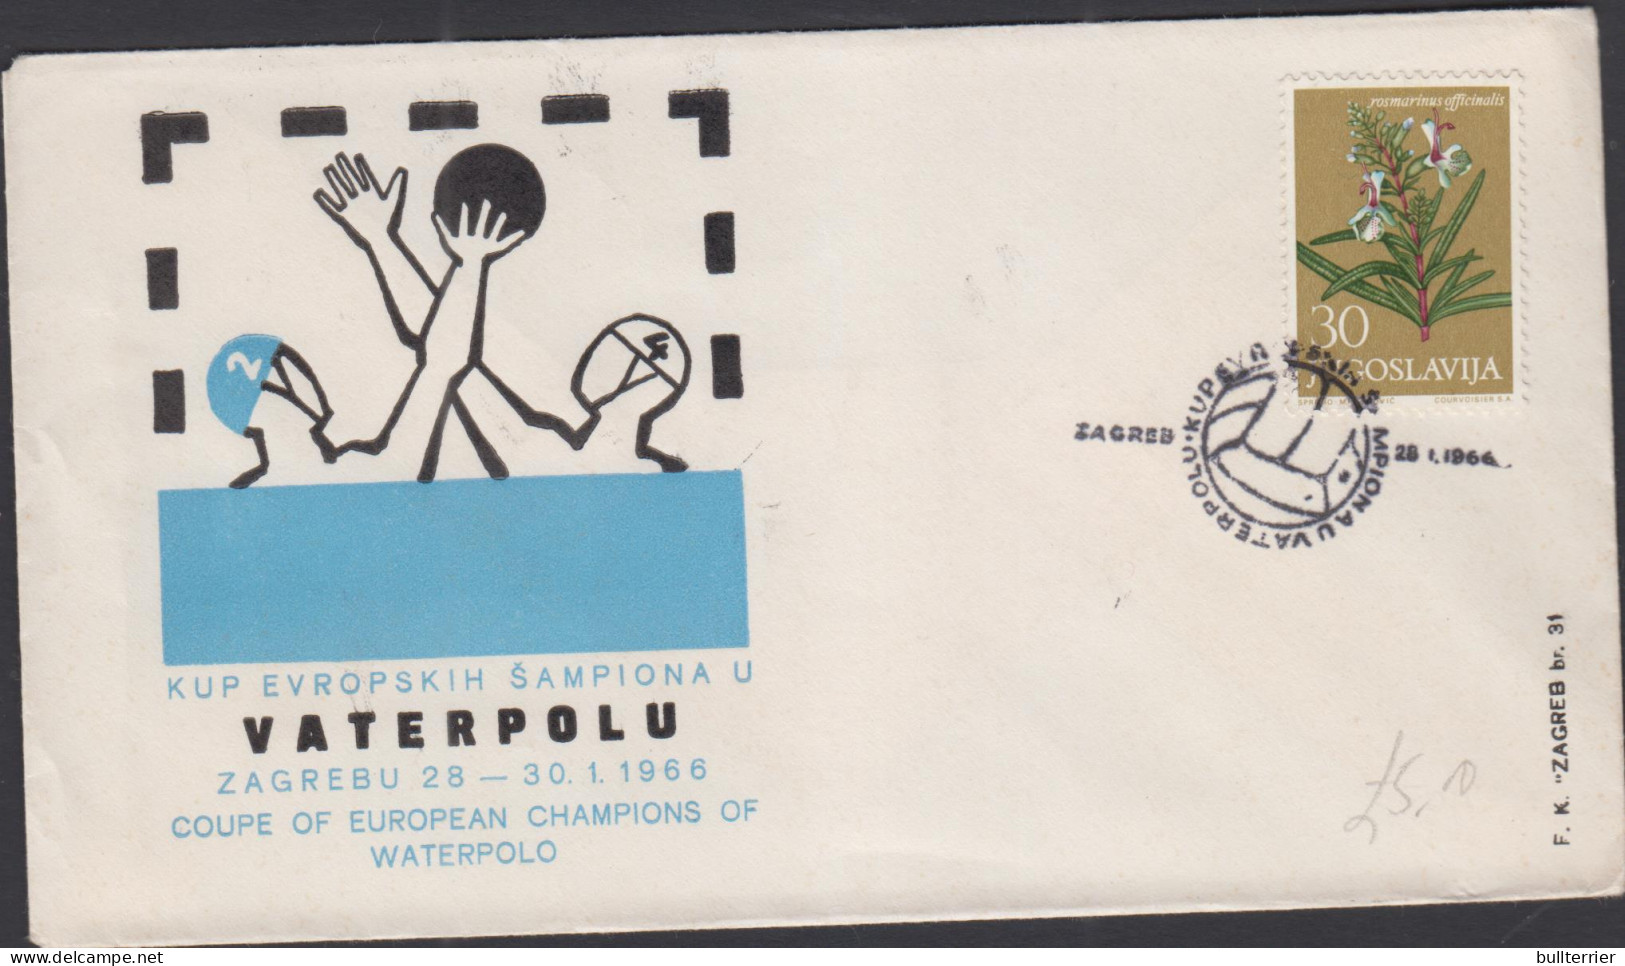 SPORTS - YUGOSLAVIA -1966- ILLUSTRATED COVER AND POSTMARK WATER POLO CUP - INTERESTING ITEM  - Waterpolo